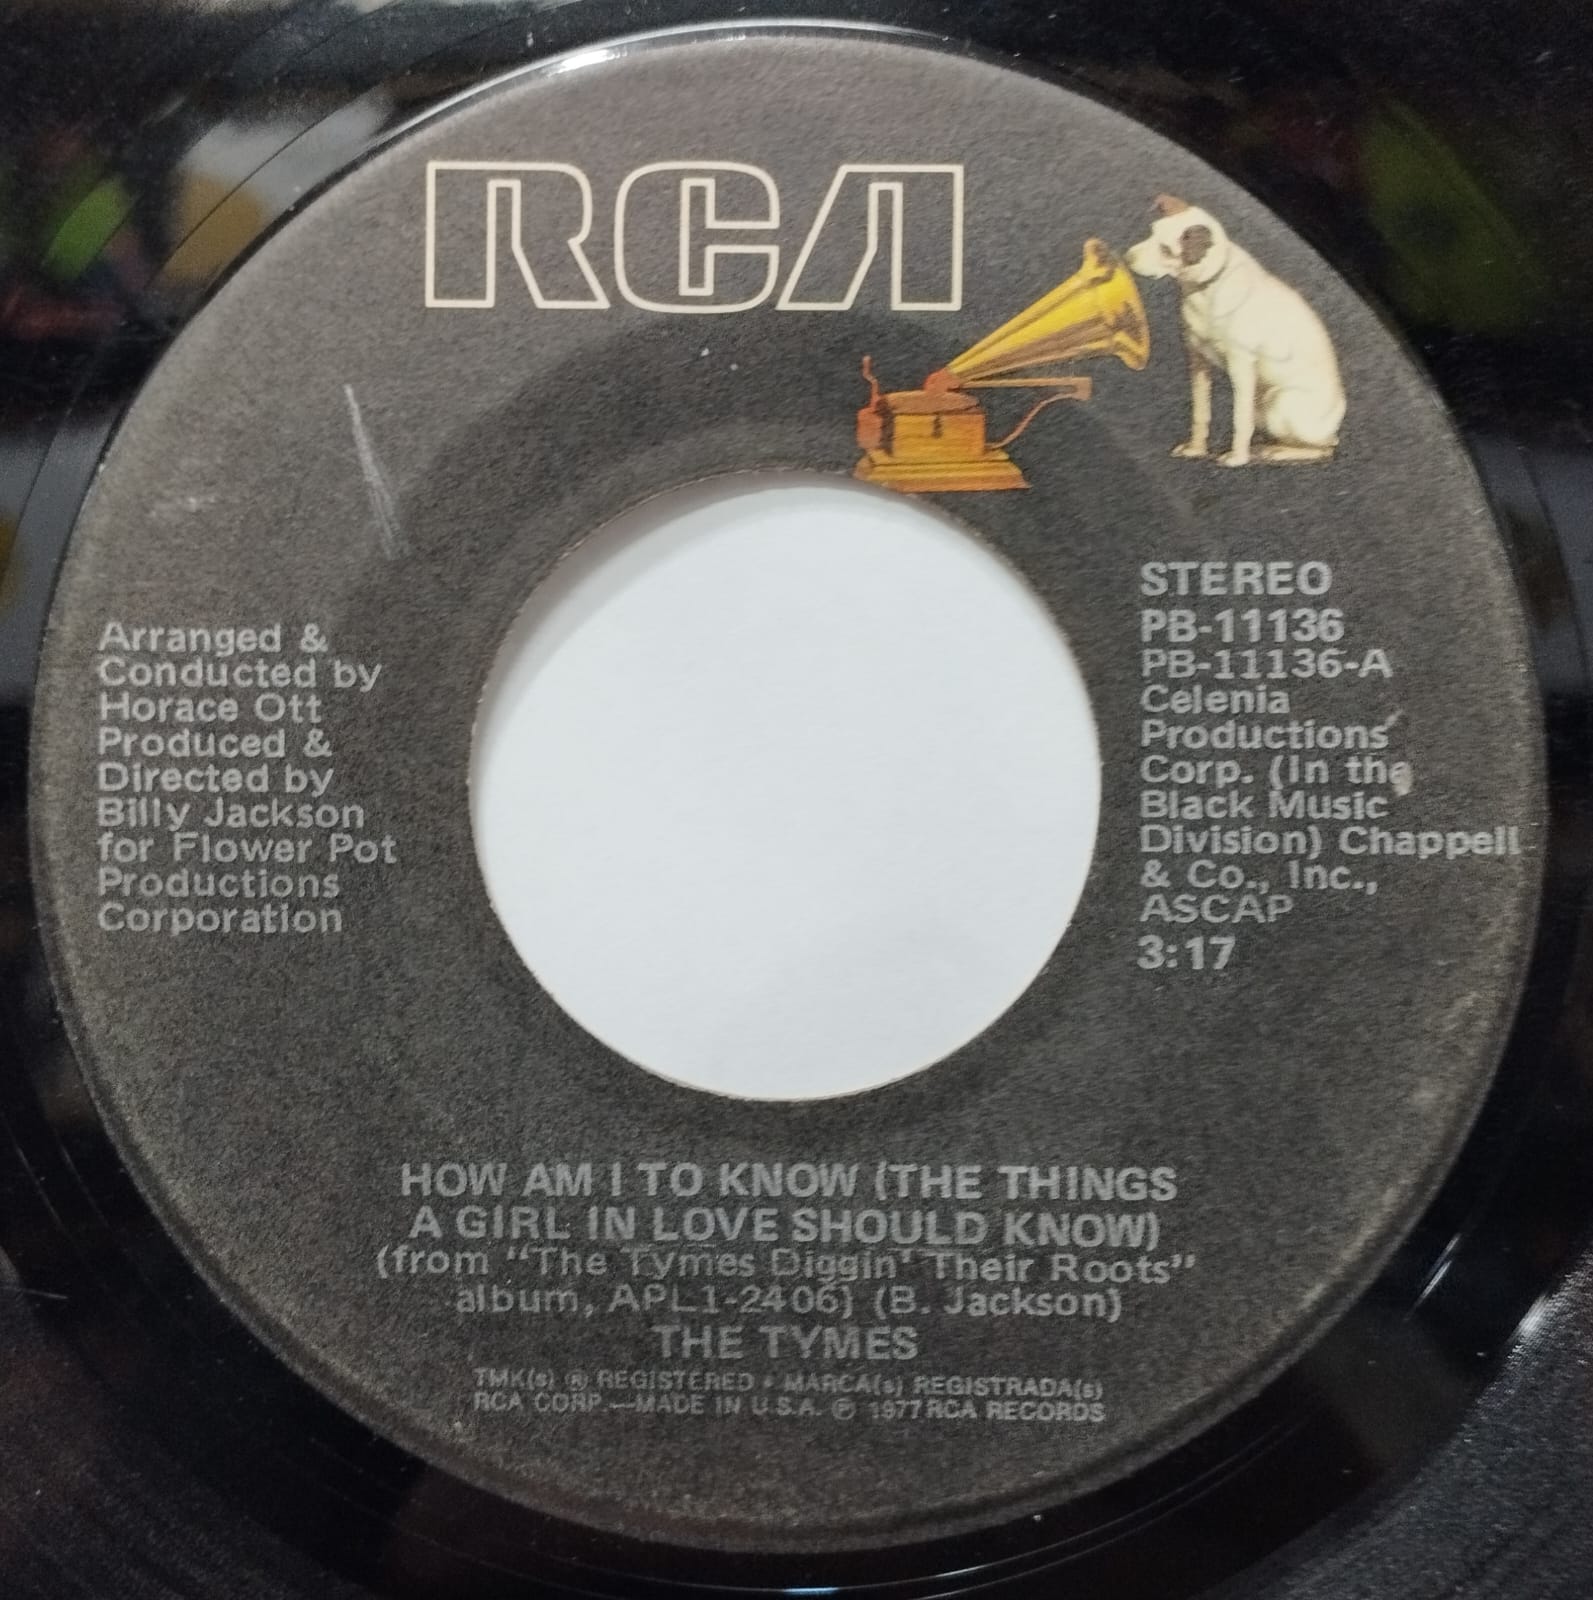 The Tymes - How Am I To Know (The Things A Girl In Love Should Know) (Compacto)